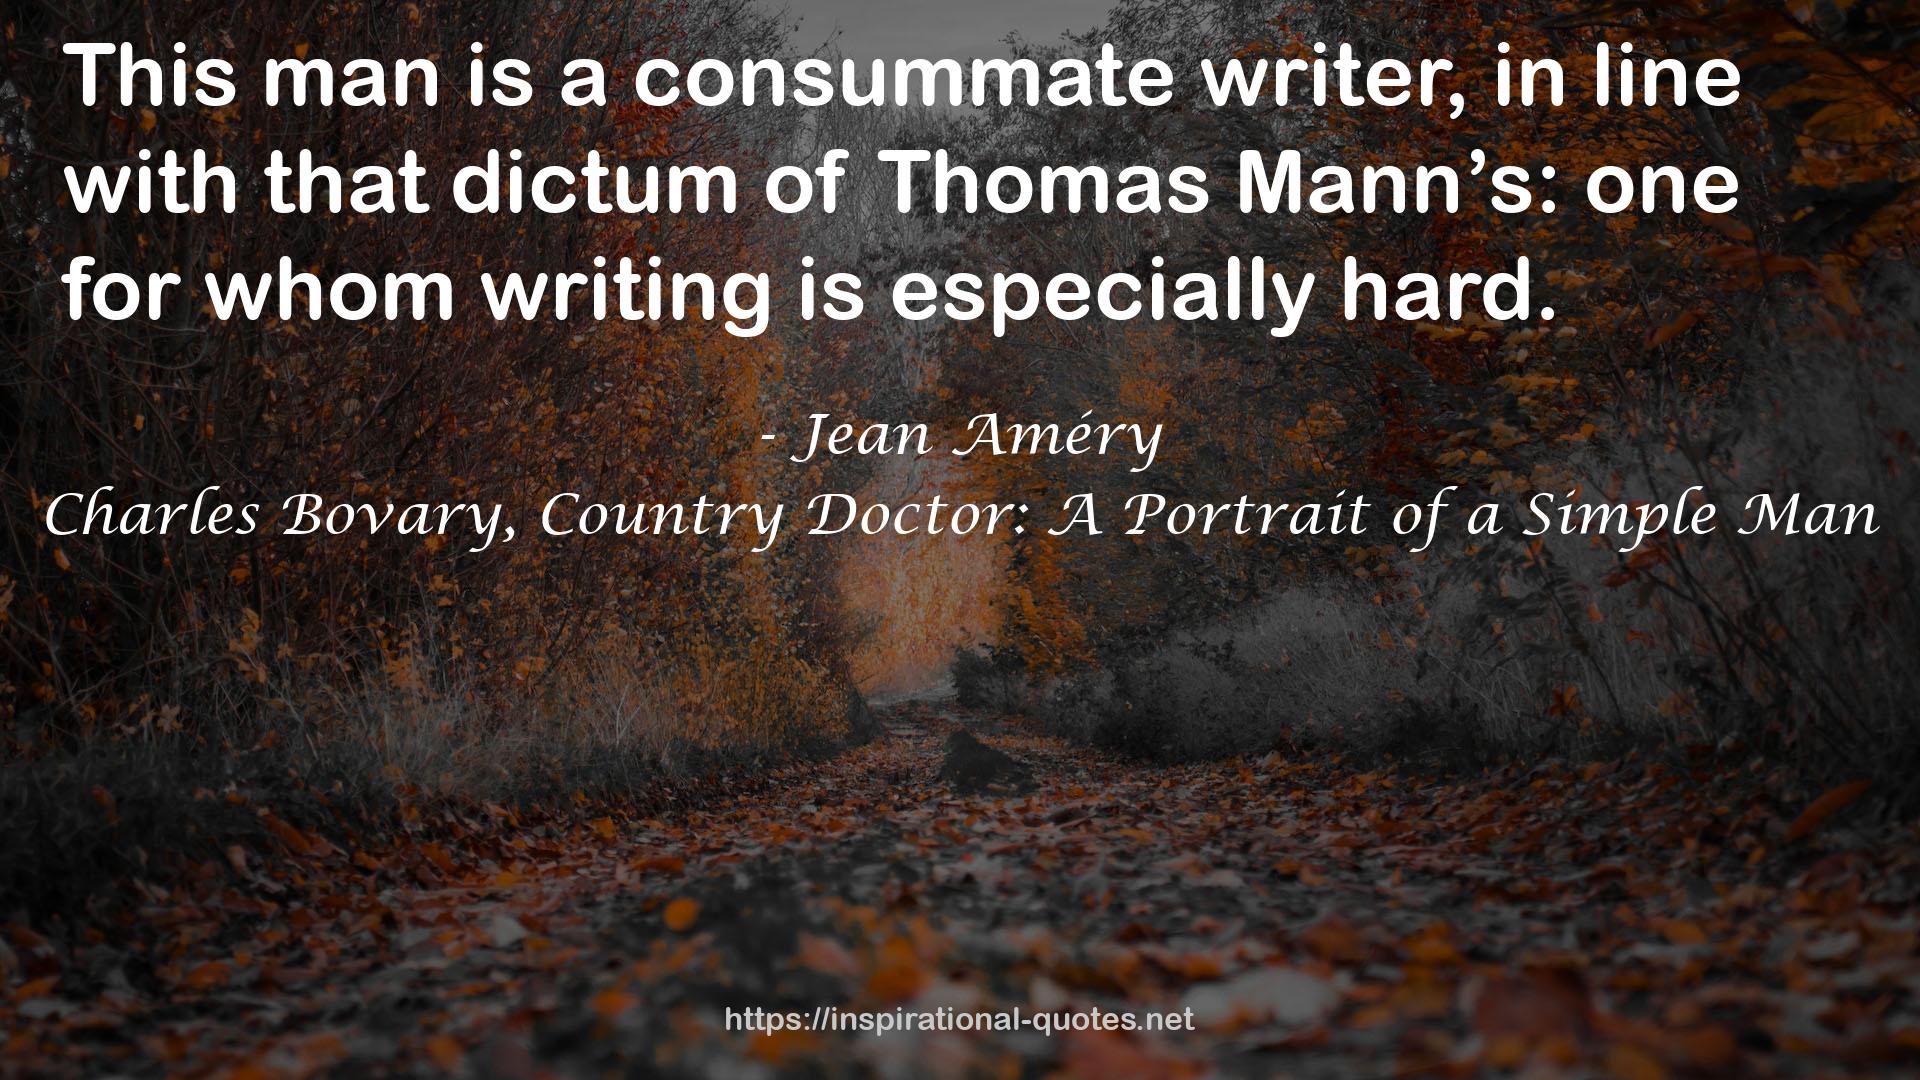 Charles Bovary, Country Doctor: A Portrait of a Simple Man QUOTES